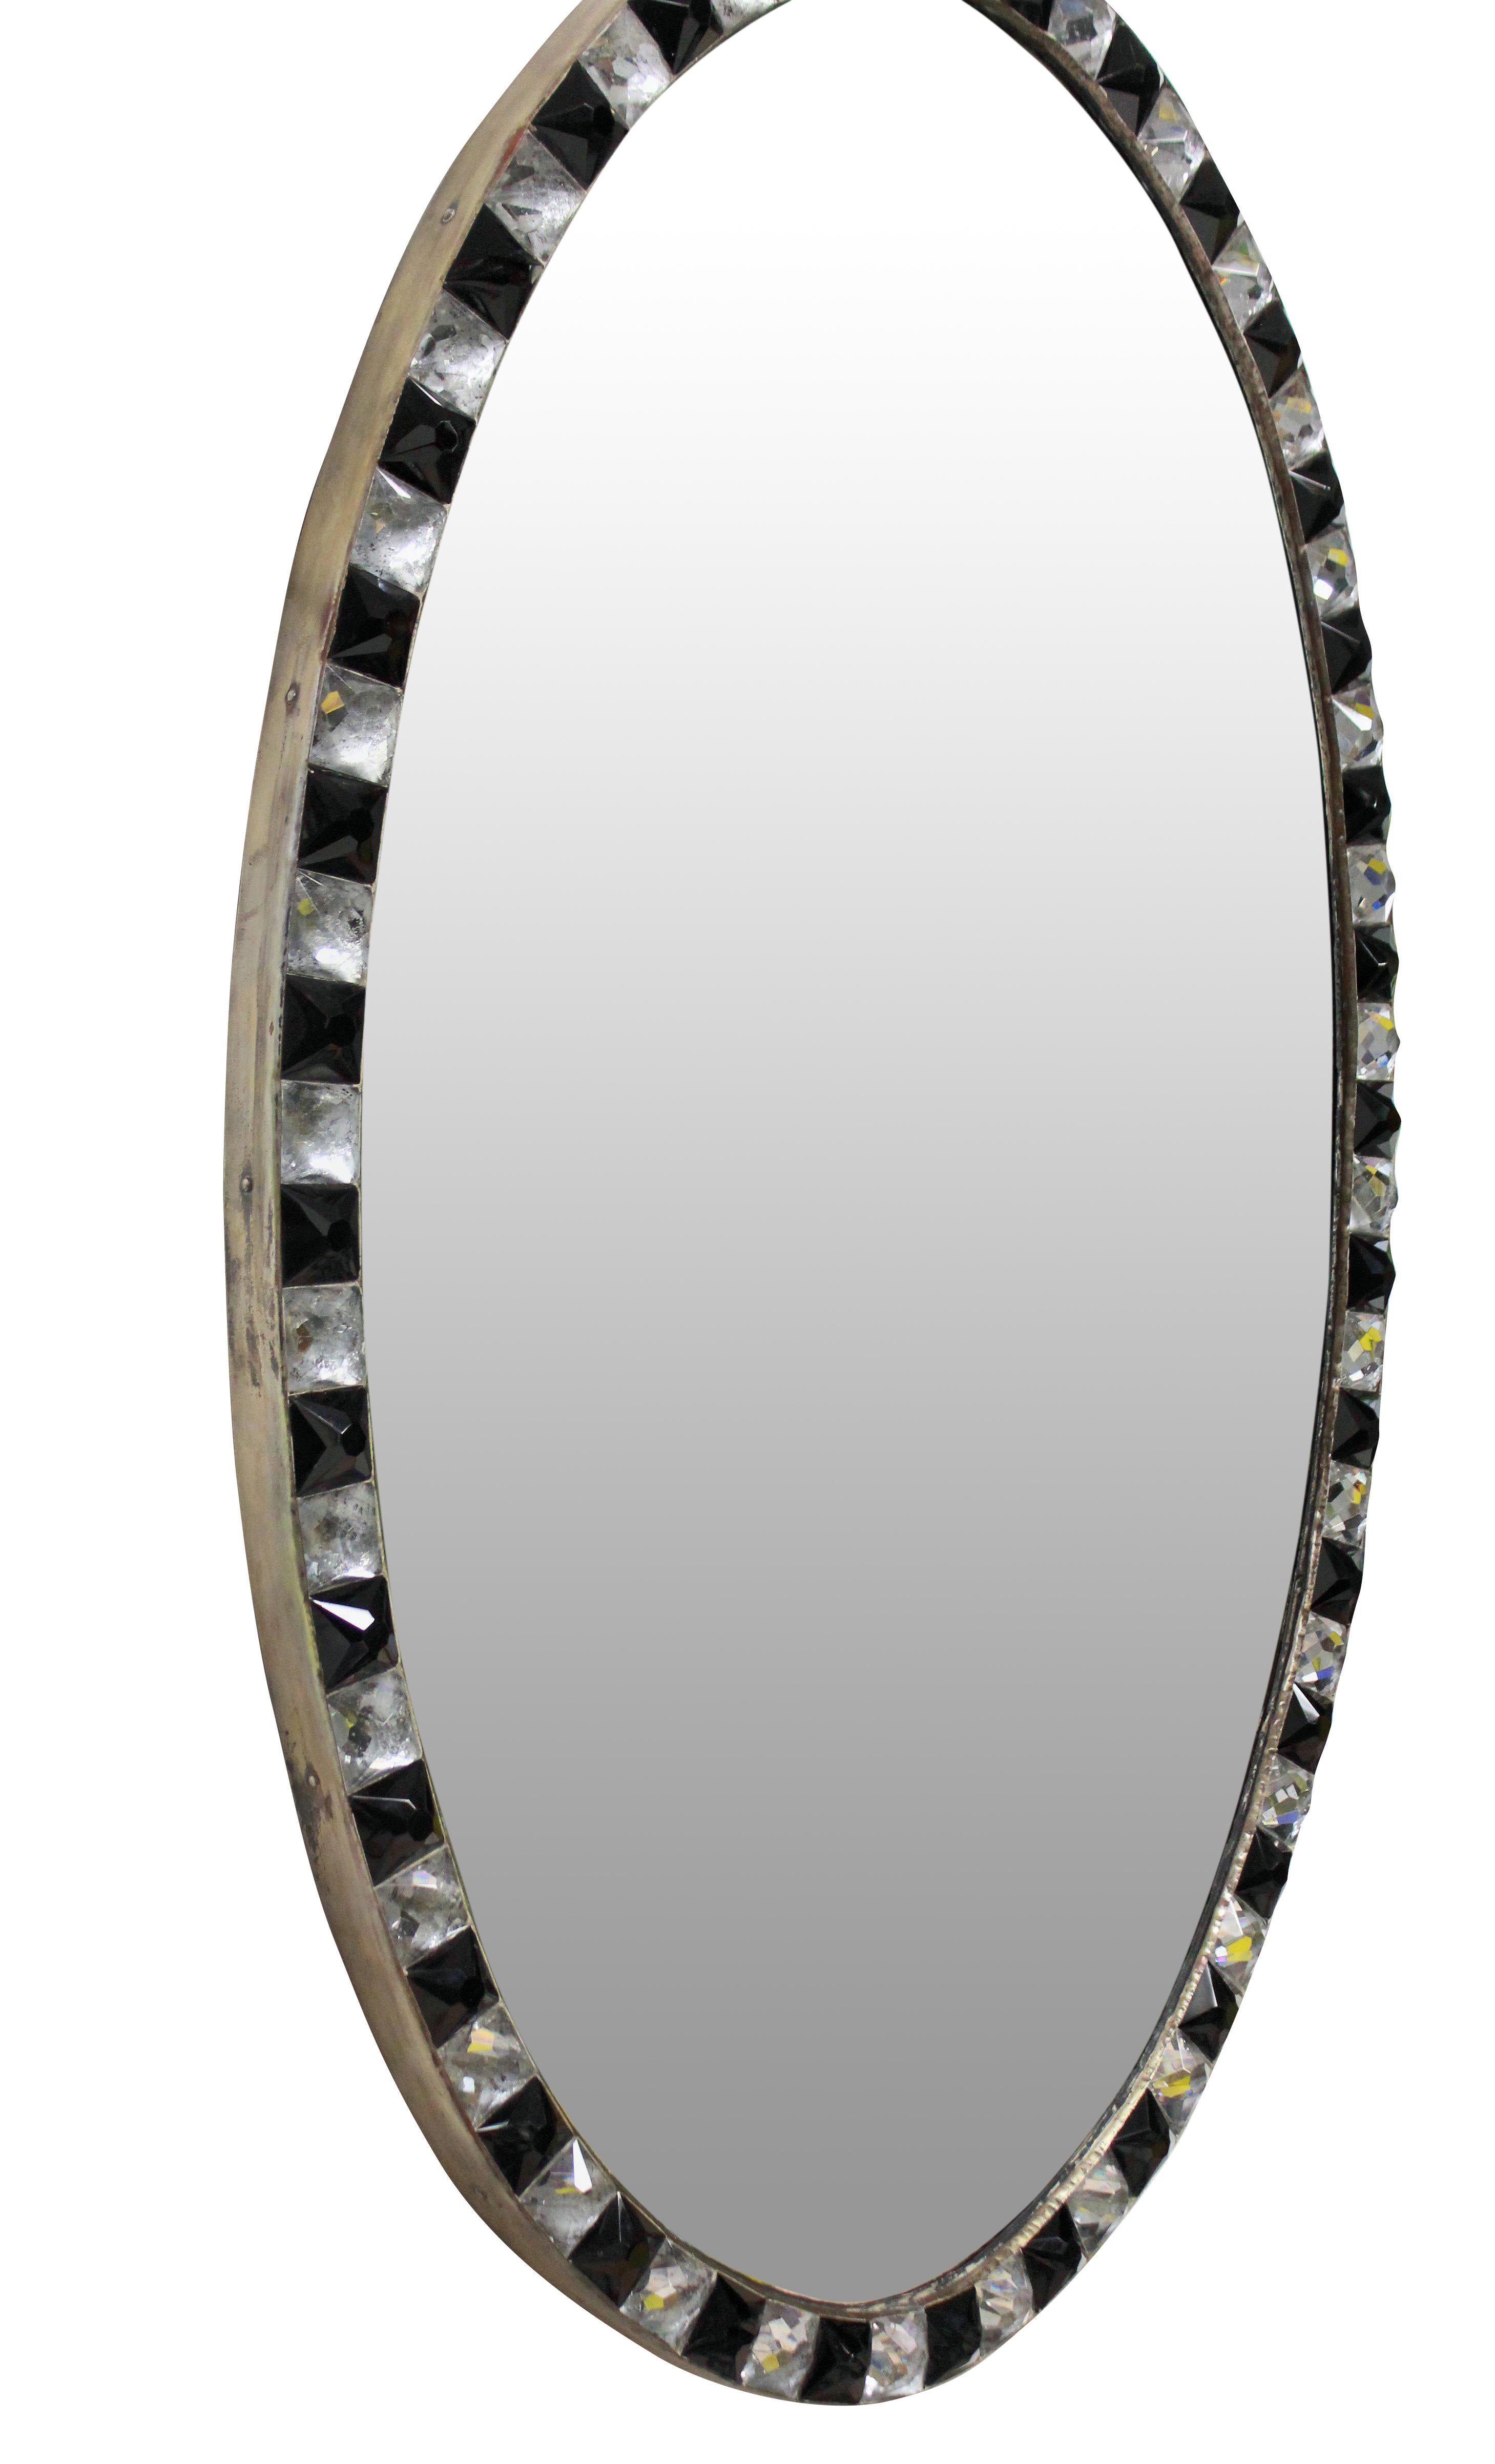 An Irish mirror in the George III style, of good quality with a faux mercury glass mirror plate pinned into a patinated copper frame, bordered with rock crystal and black glass faceted studs in the traditional 18th century manner. Of good weight and